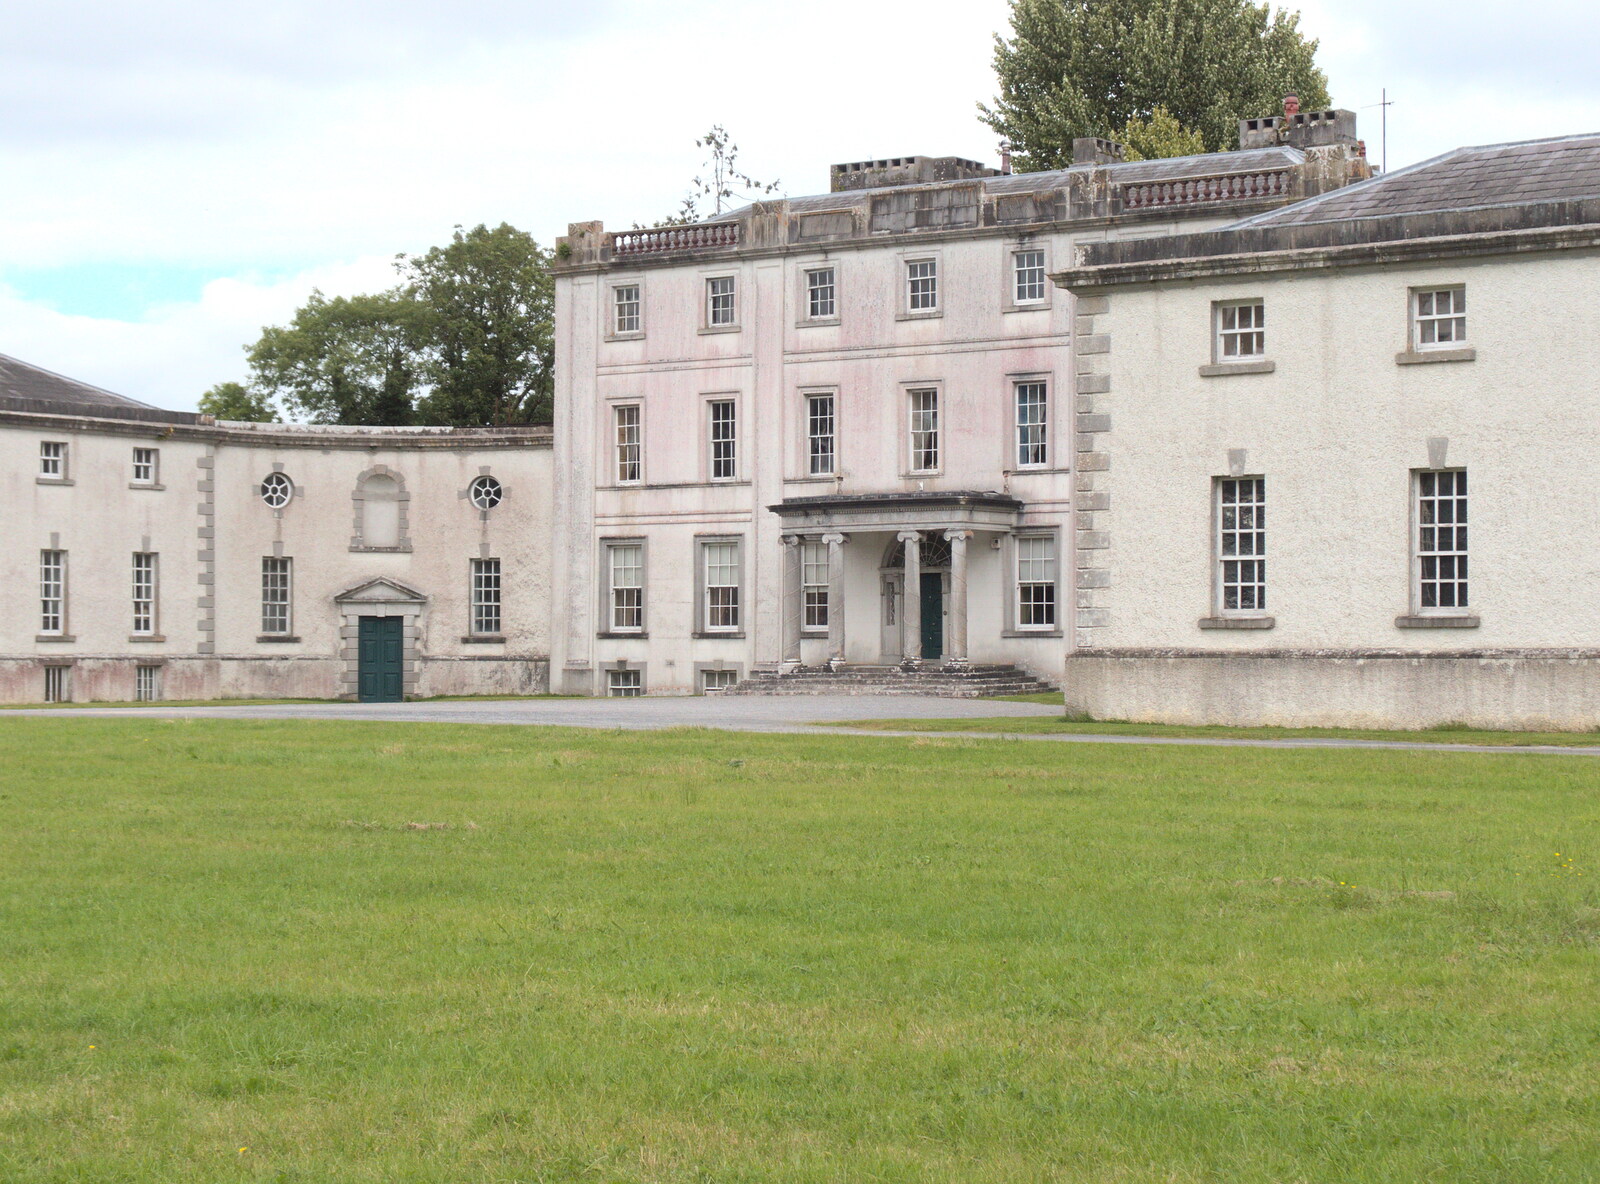 Strokestown Park House from From Achill to Strokestown, Mayo and Roscommon, Ireland - 10th August 2017